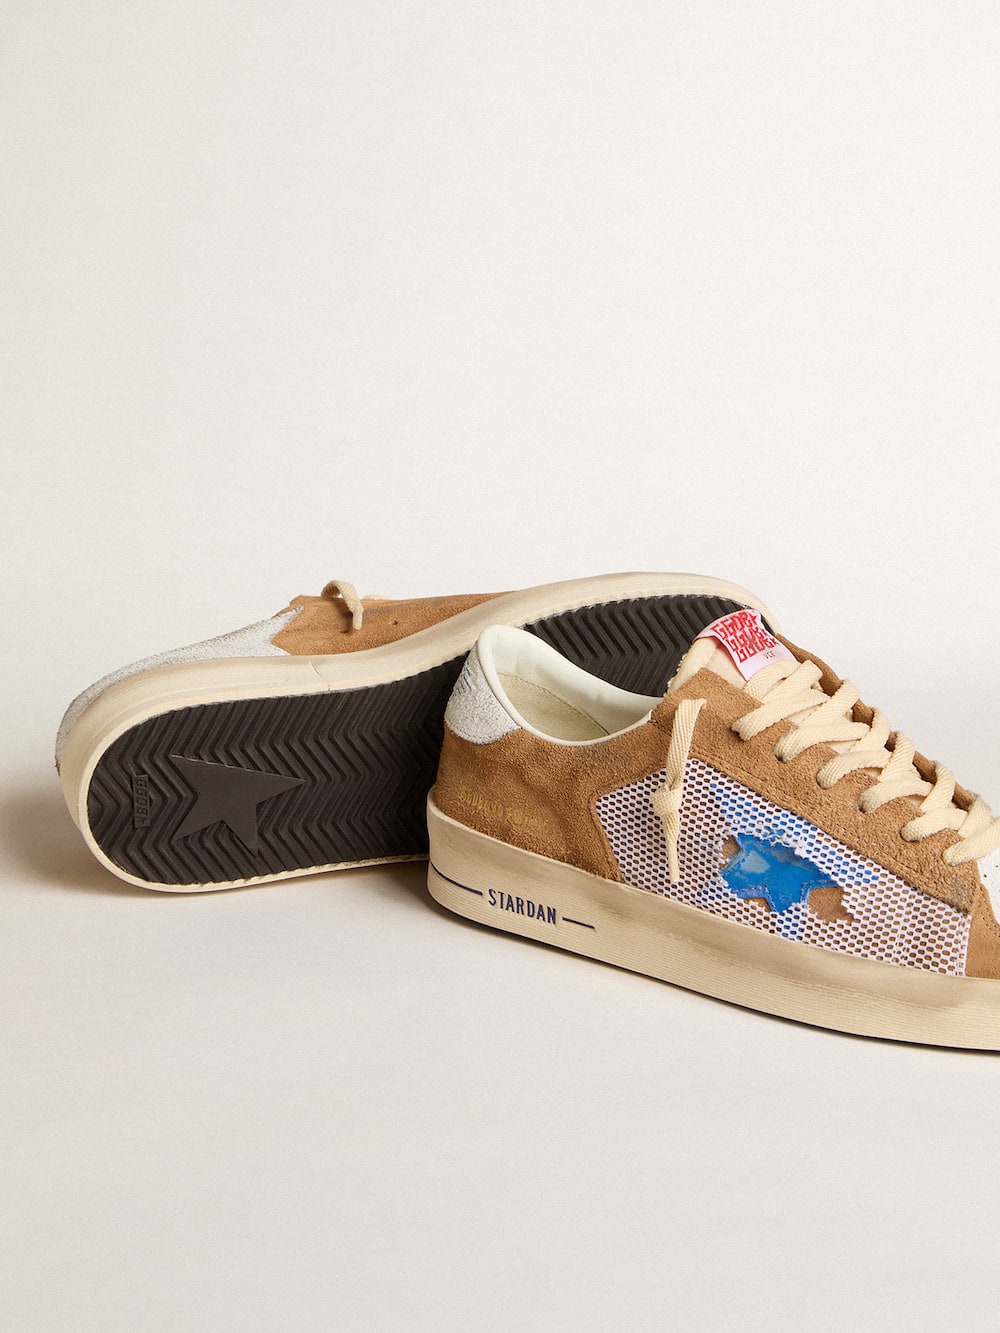 Golden Goose - Stardan LTD in tobacco suede and mesh with blue star and leather heel tab in 